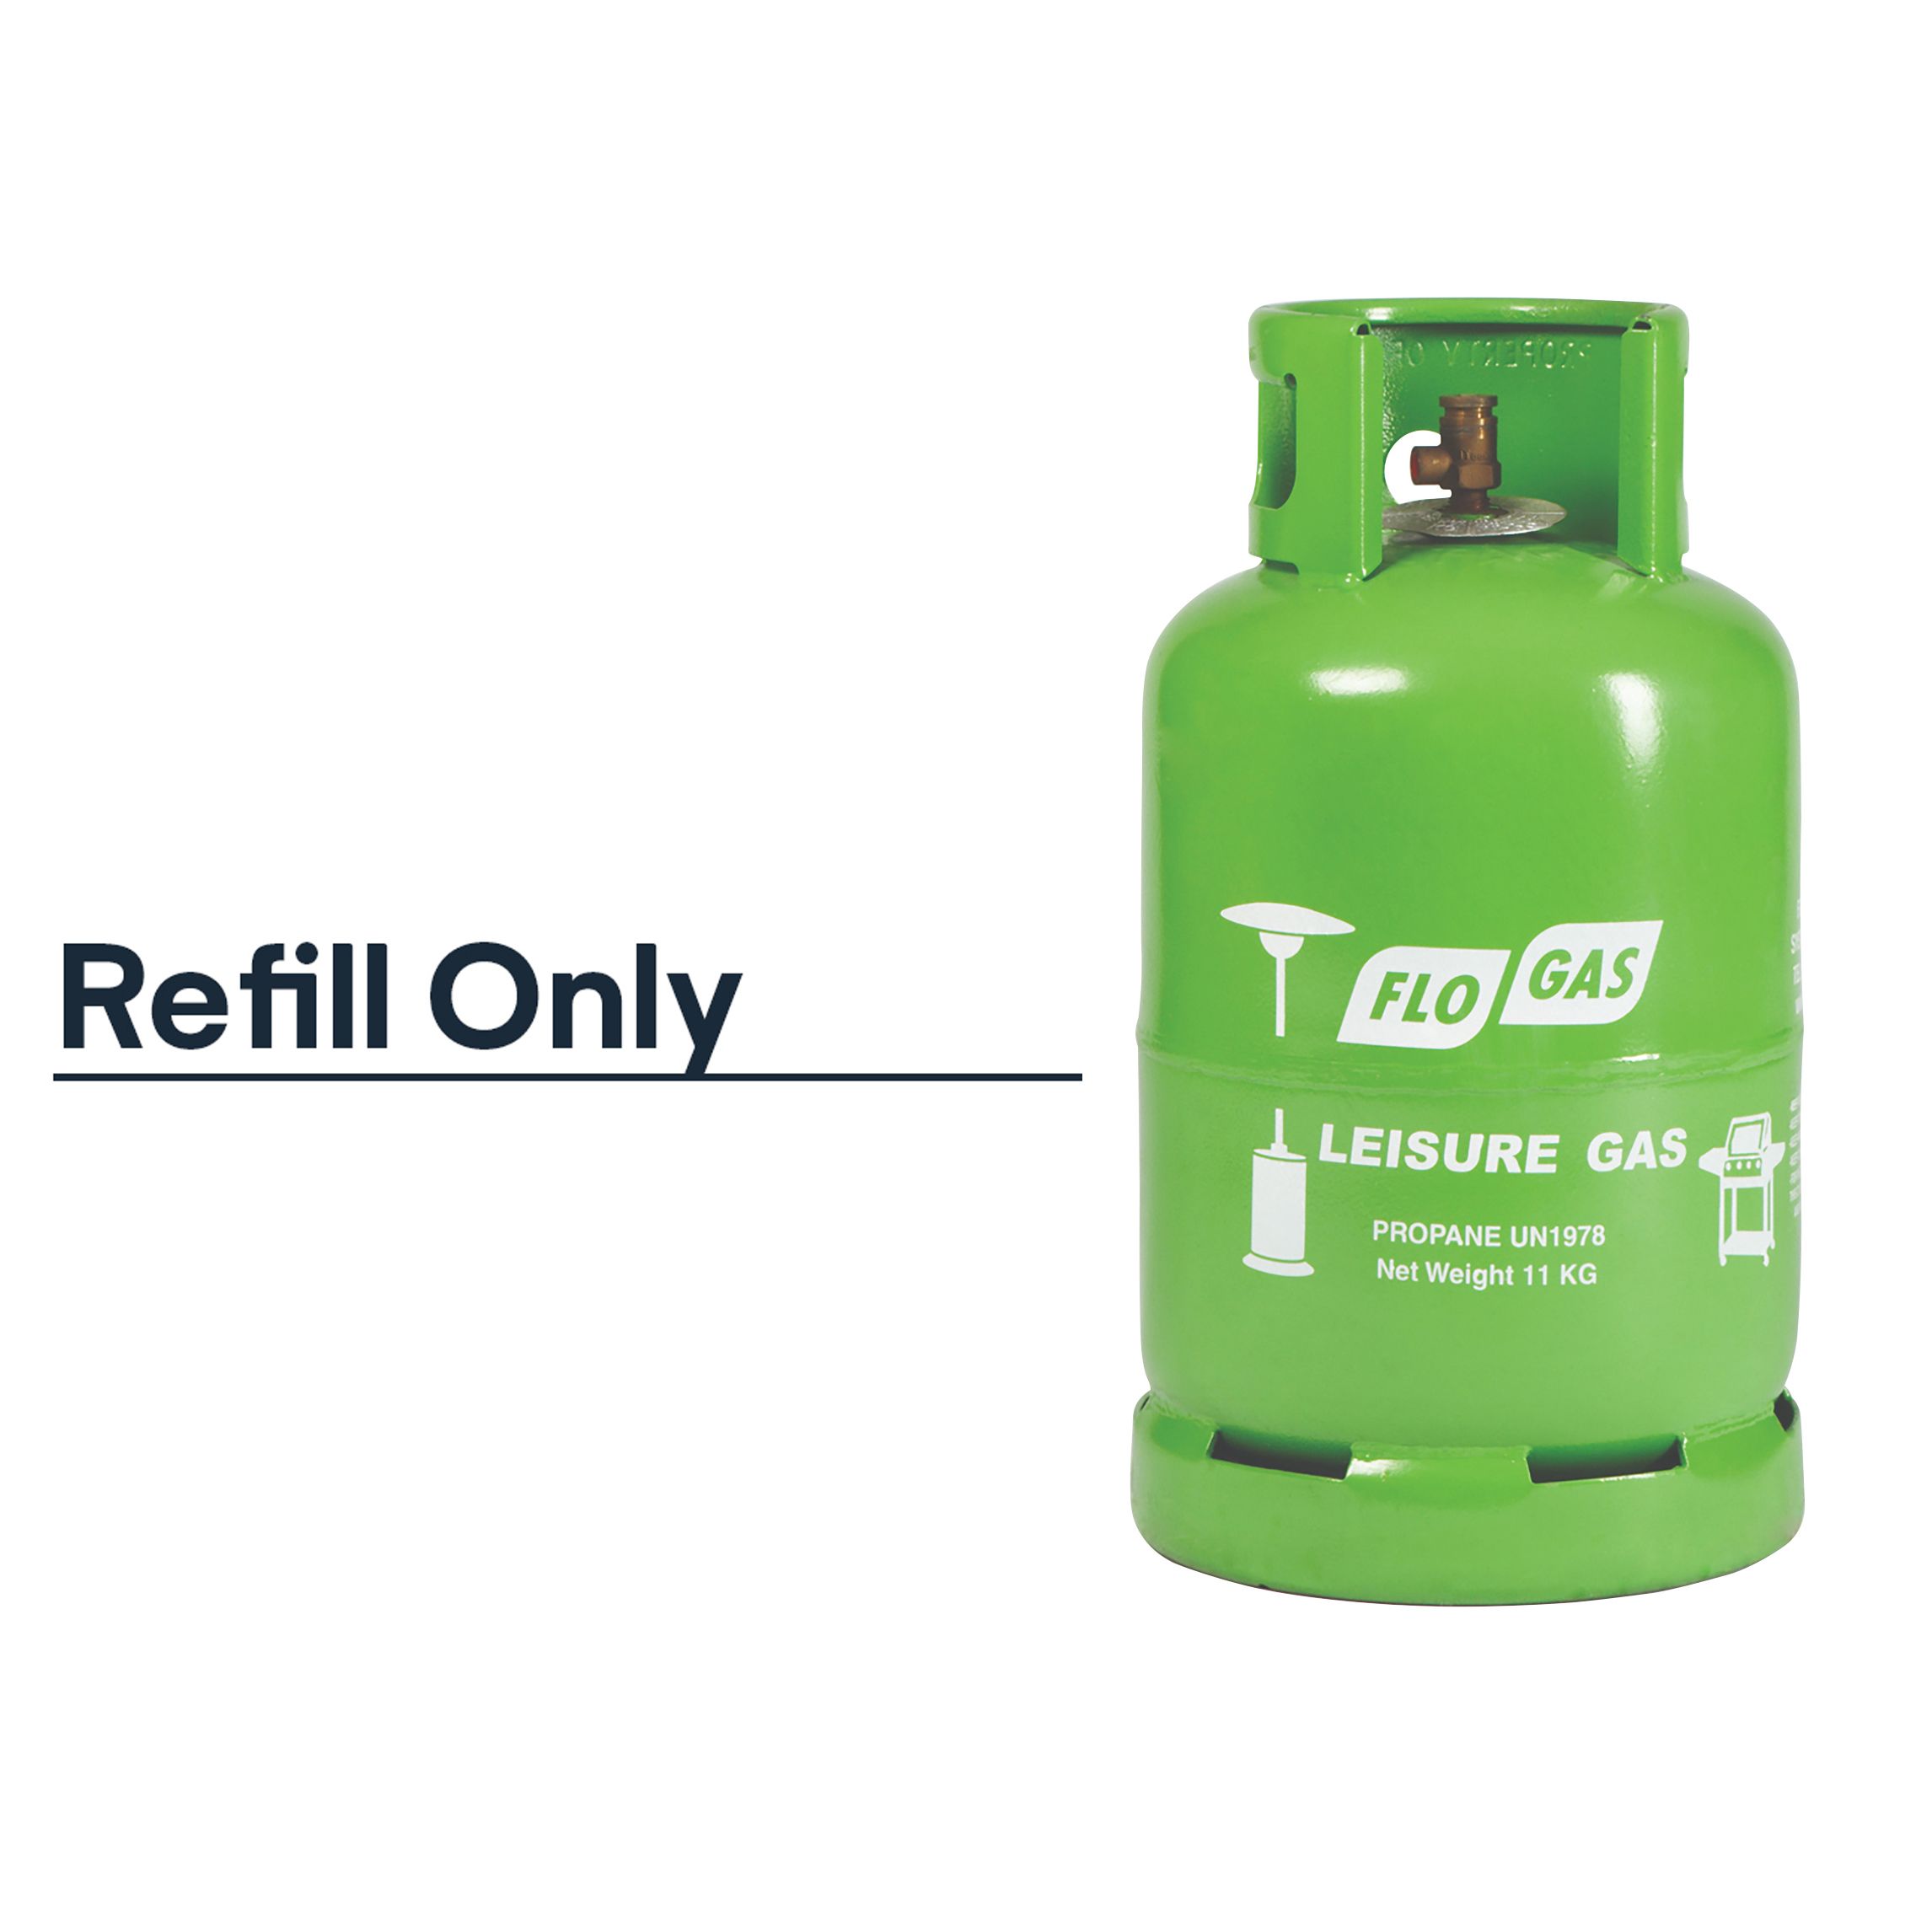 Flogas Leisure Propane Gas cylinder refill, 11kg - Existing contract required